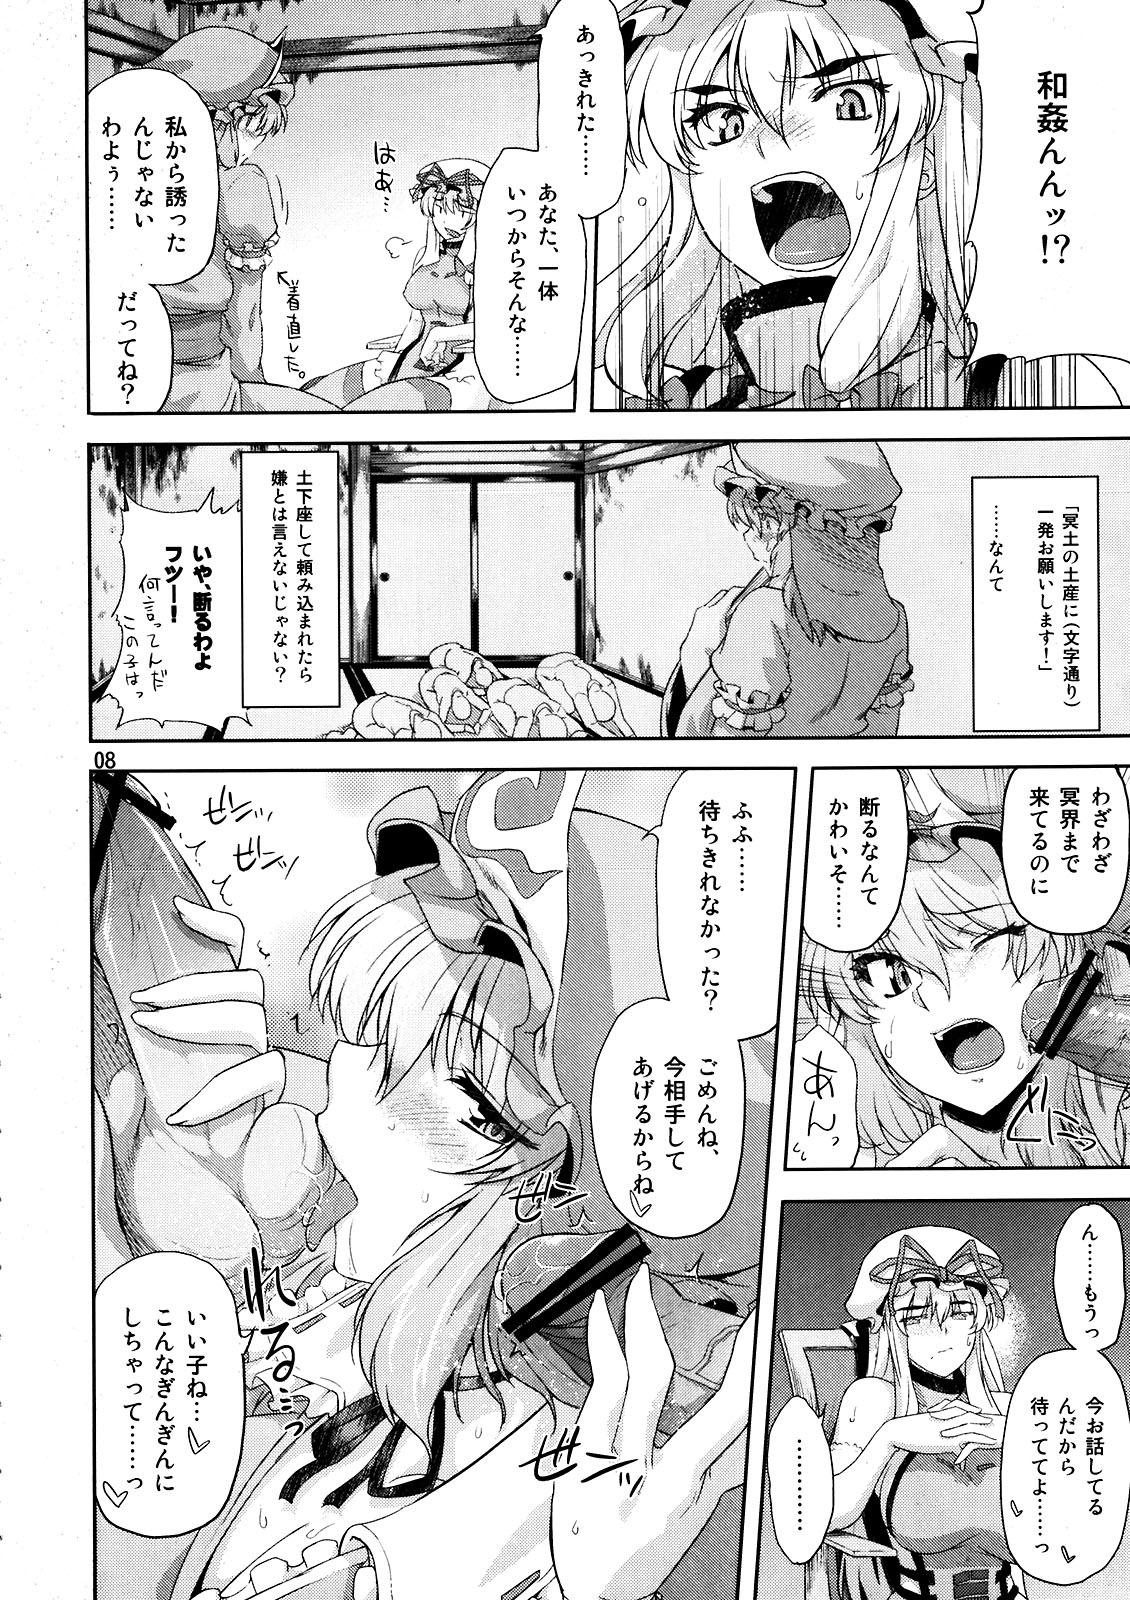 Guys Toshimaen 0 - Touhou project Piroca - Page 8